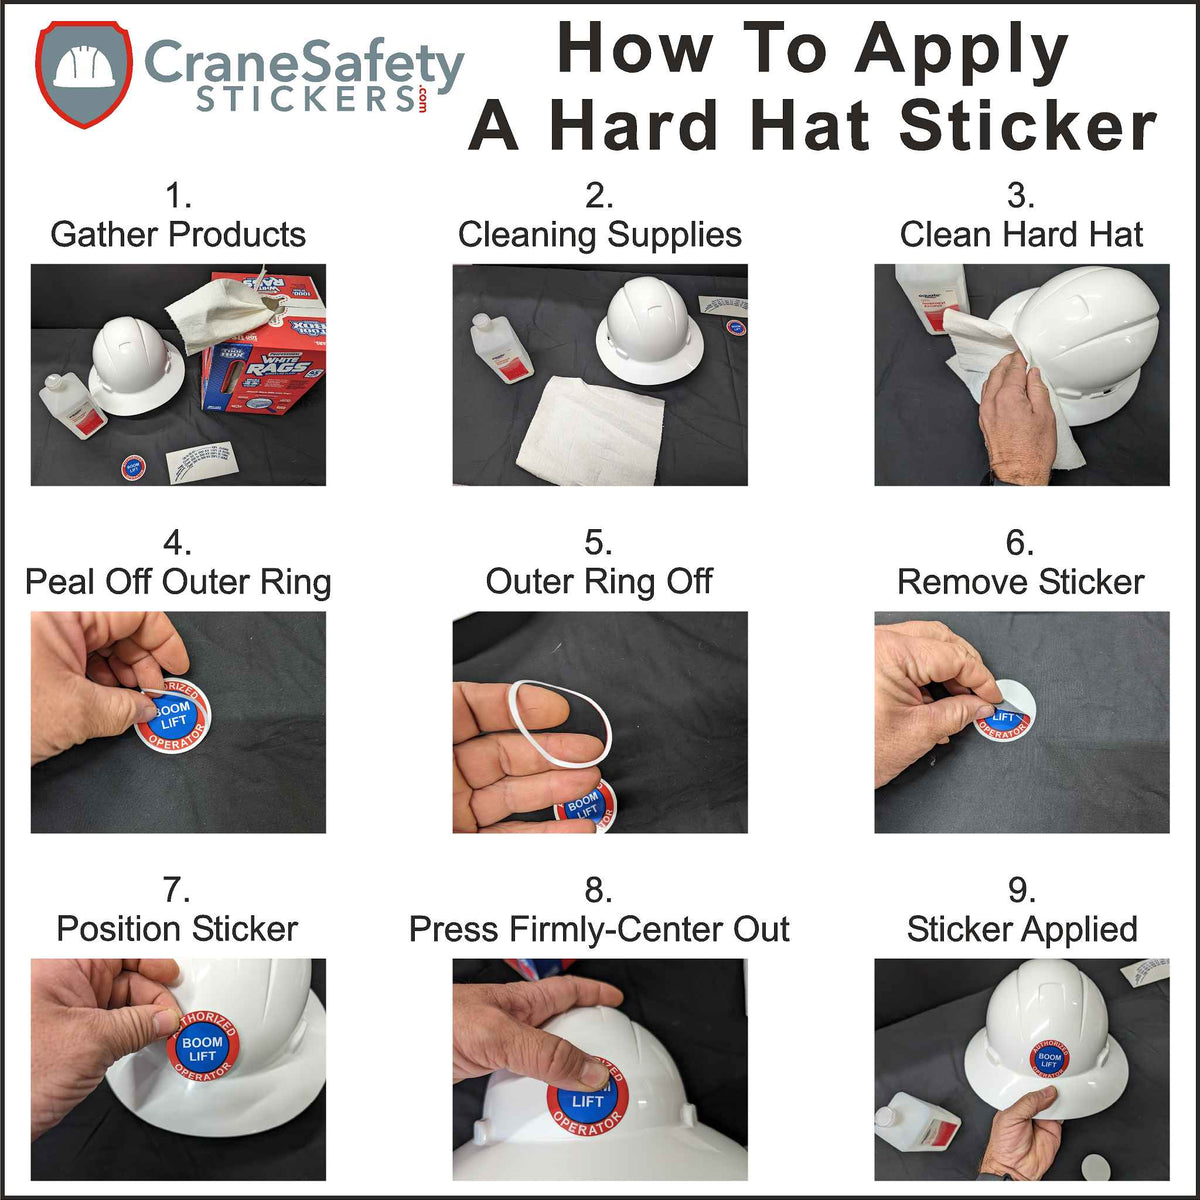 How To Apply A Traffic Control Hard Hat Sticker to a hard hat.